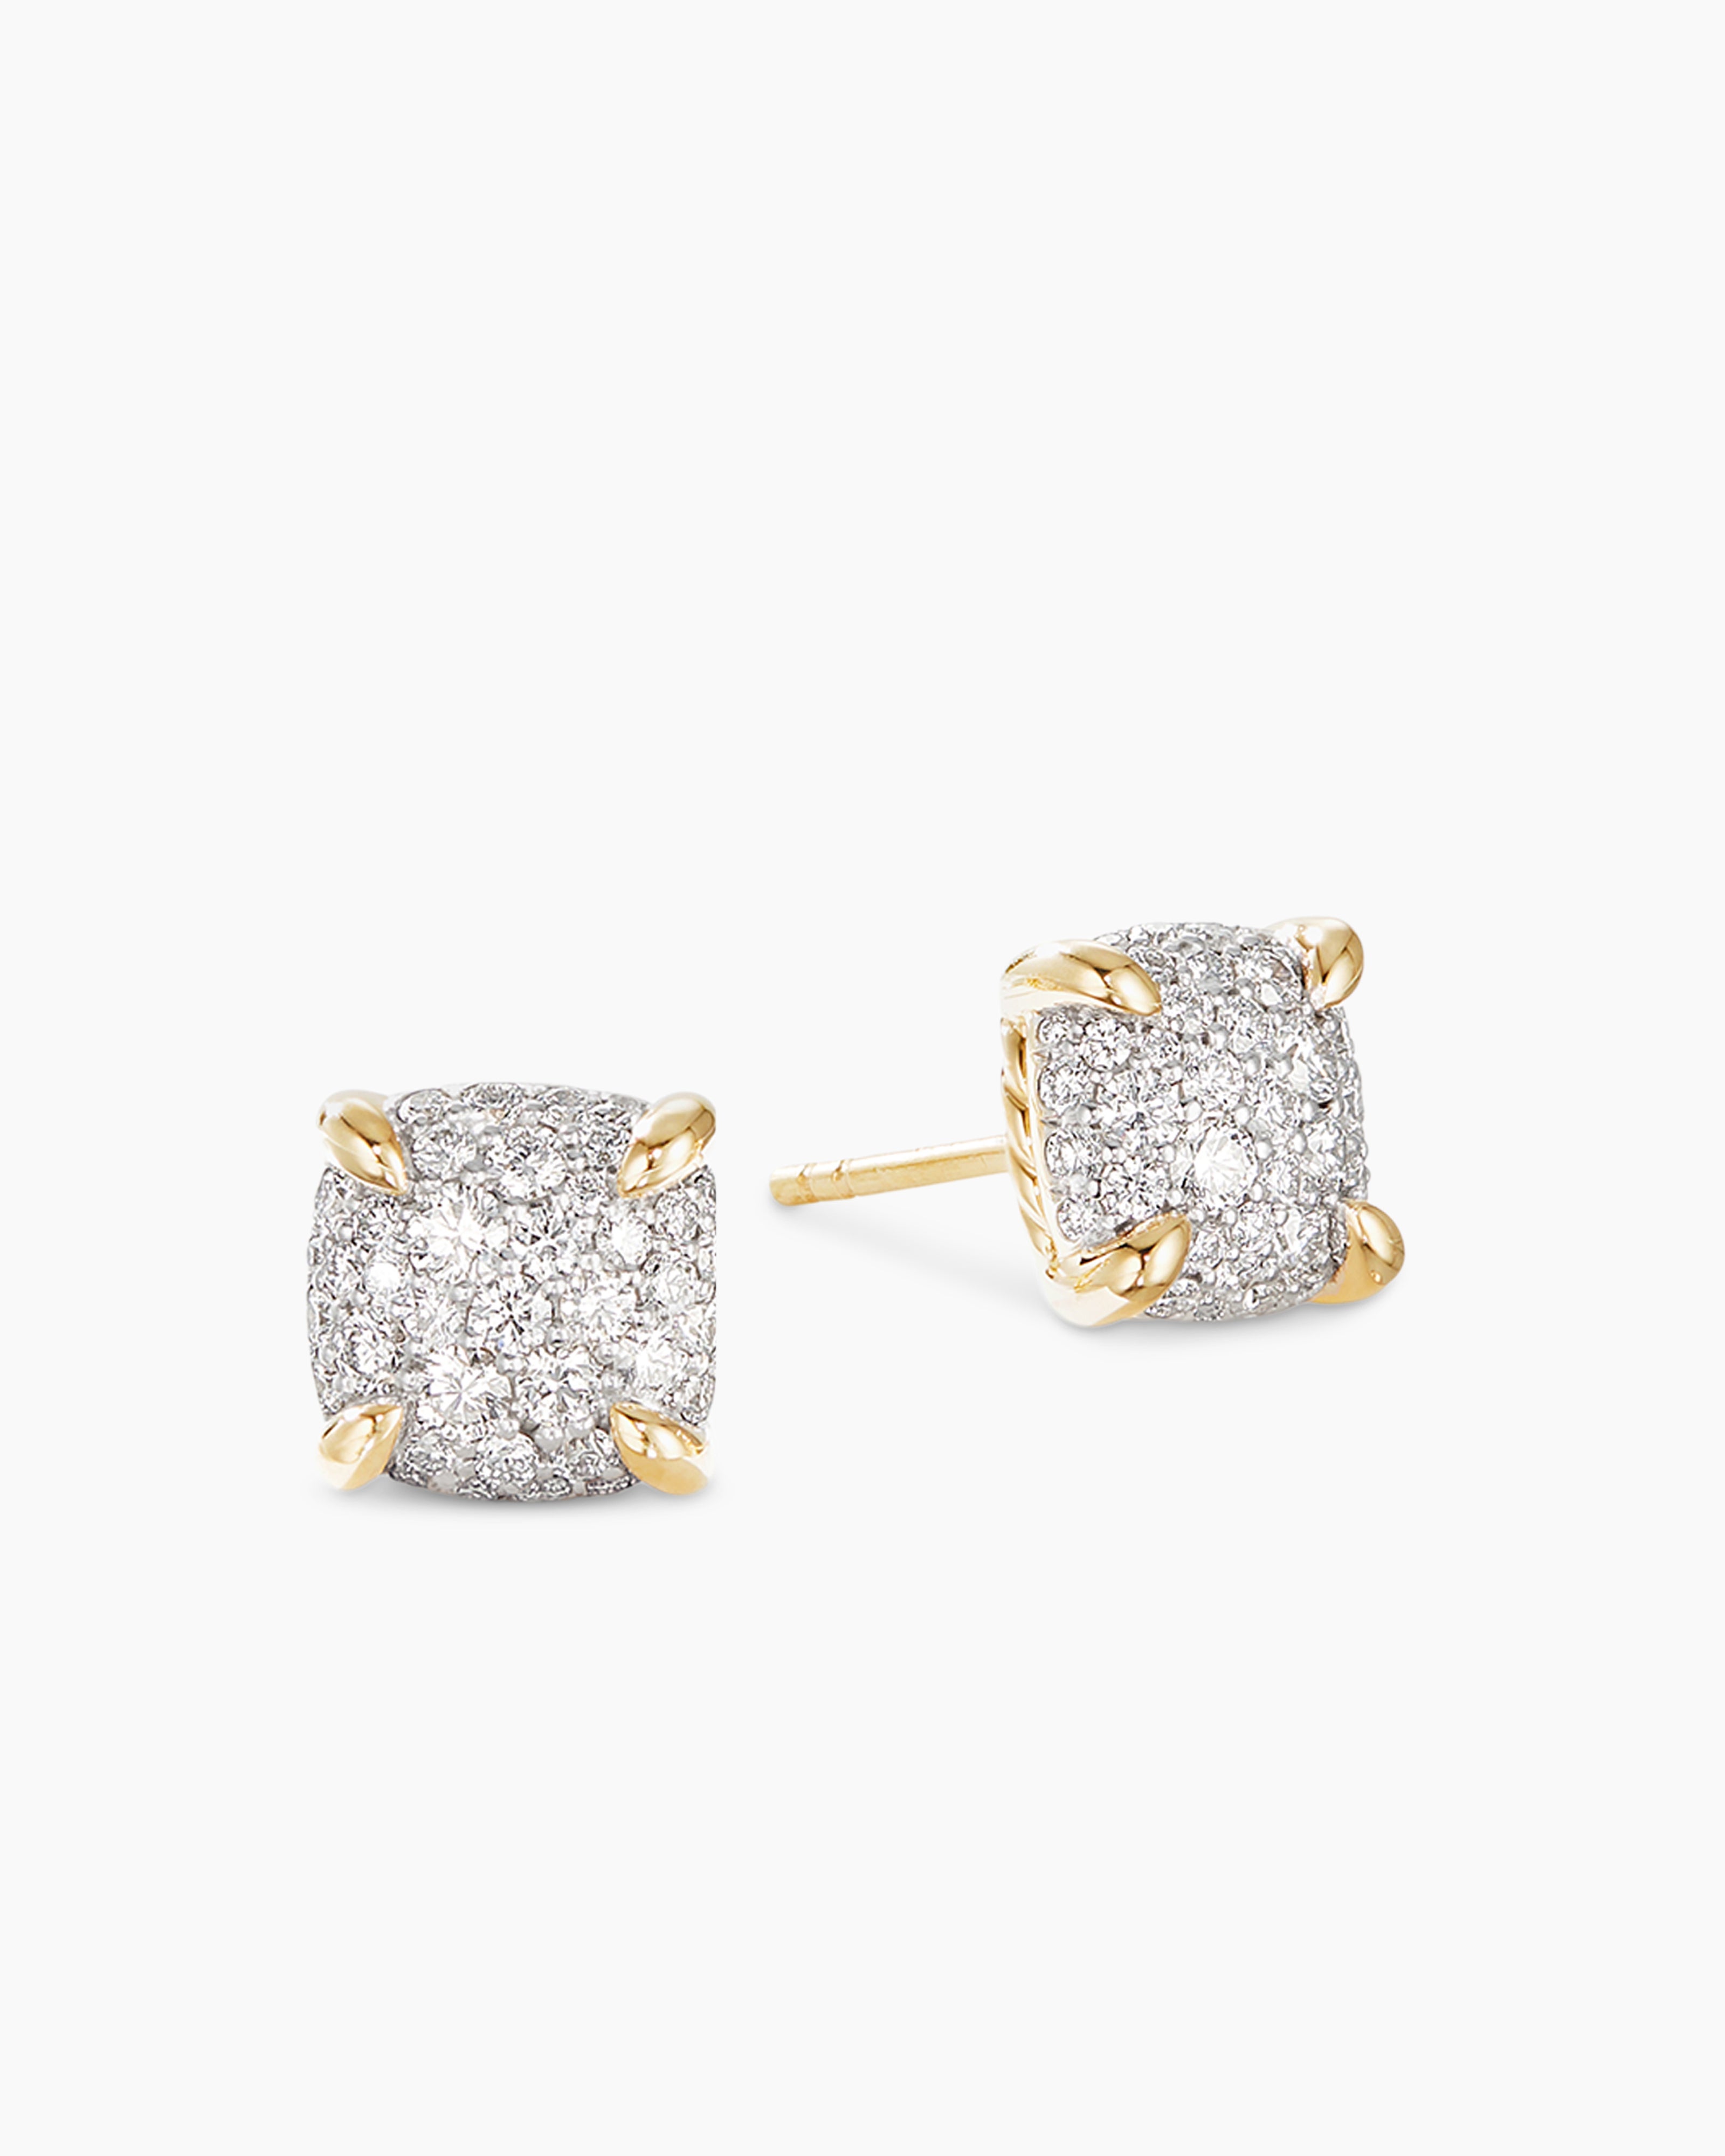 8mm Pave Set Stud Earrings in Yellow Gold – The GLD Shop